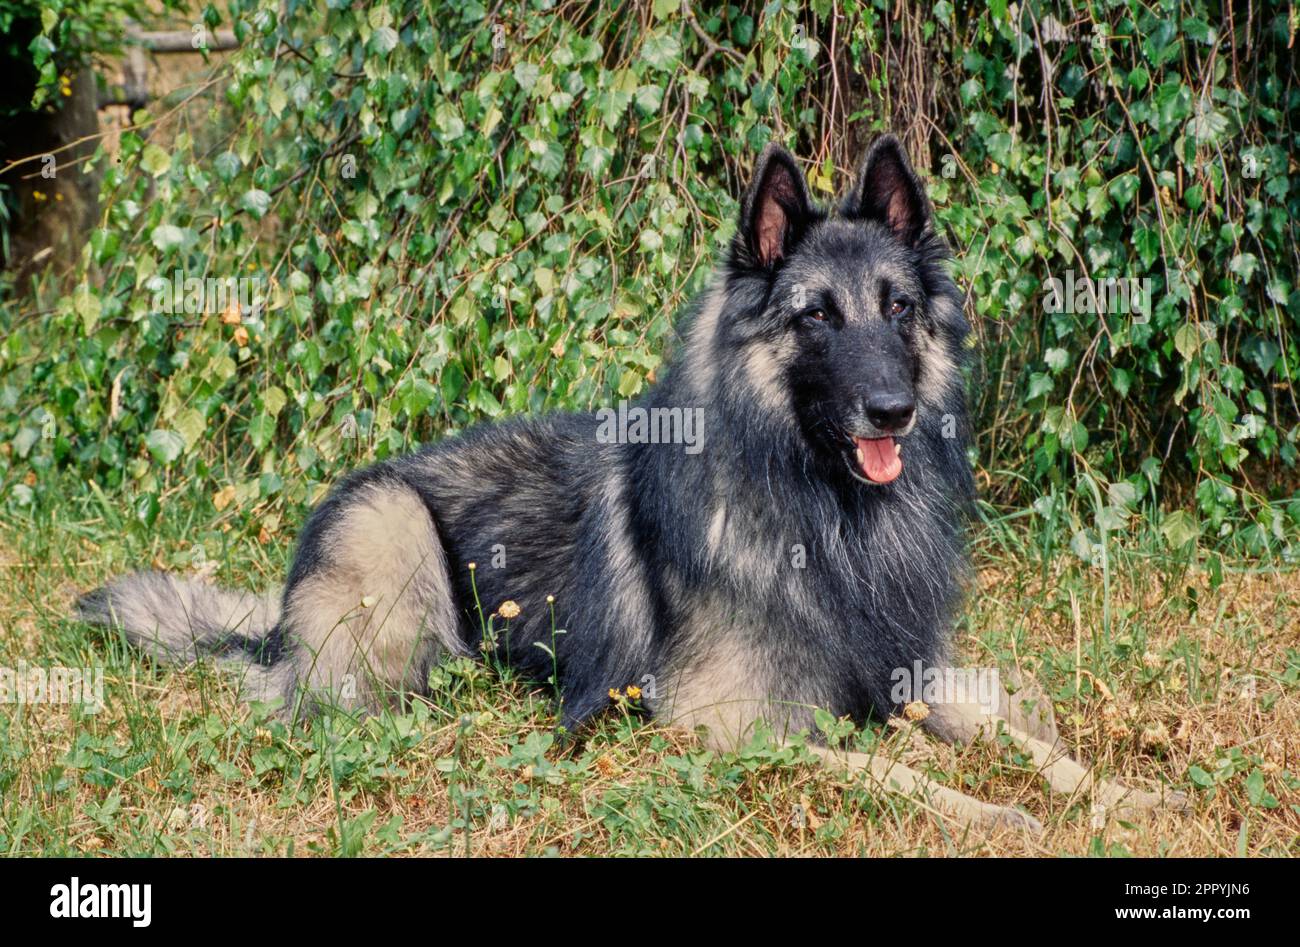 Long-haired Belgian Shepherd laying down outside in grass in front of vines Stock Photo